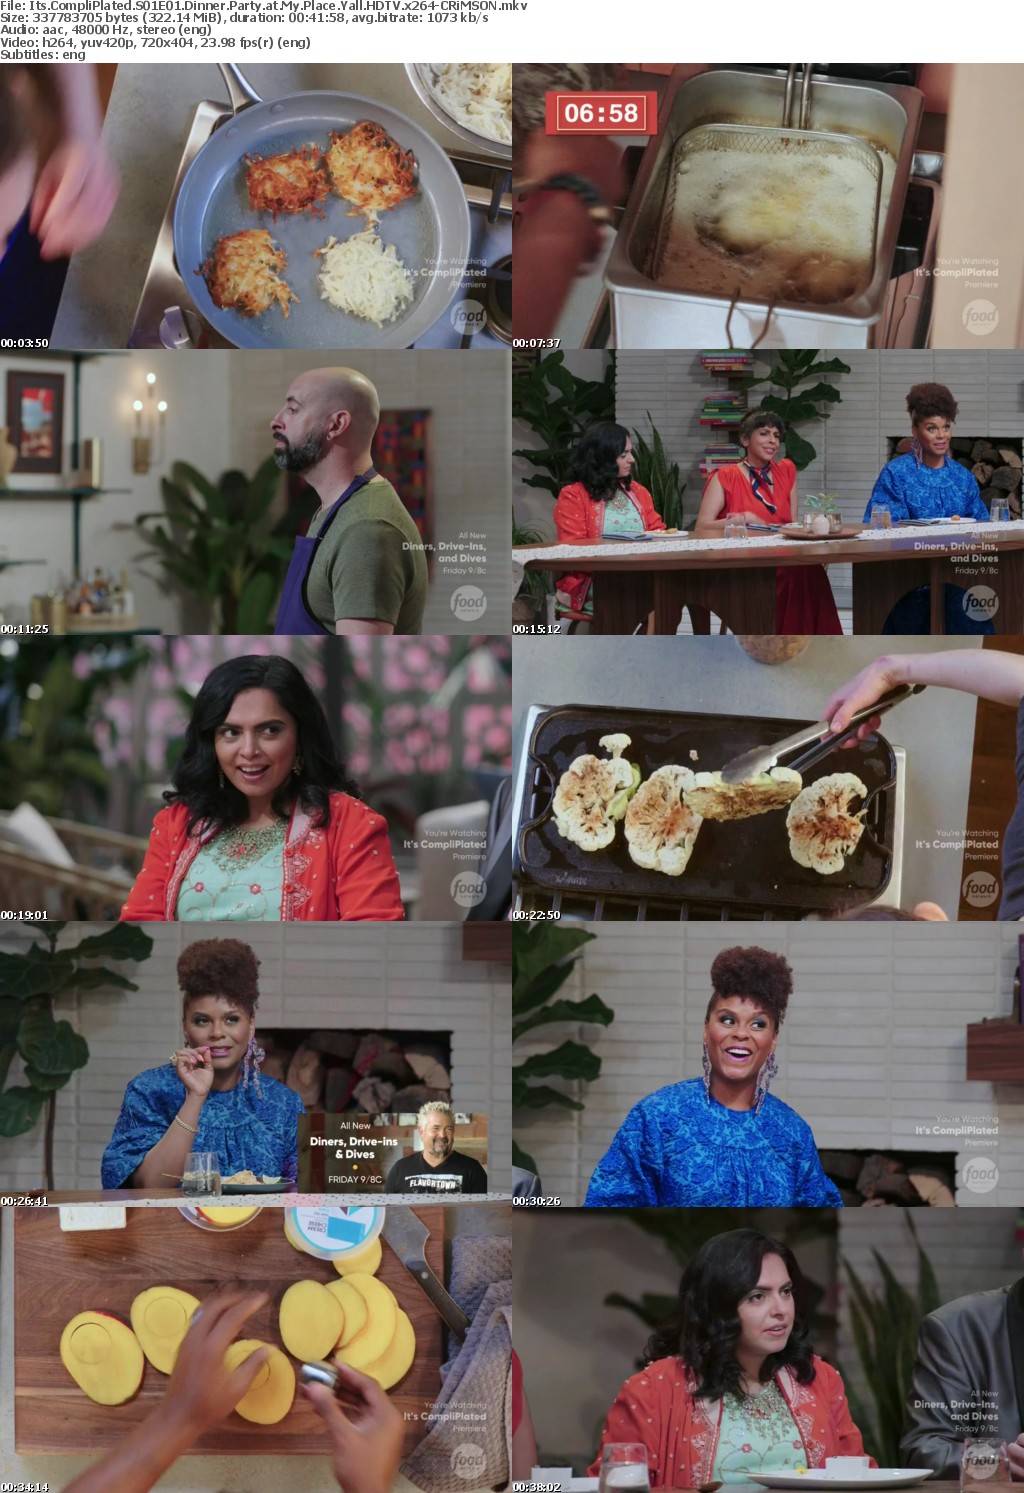 Its CompliPlated S01E01 Dinner Party at My Place Yall HDTV x264-CRiMSON